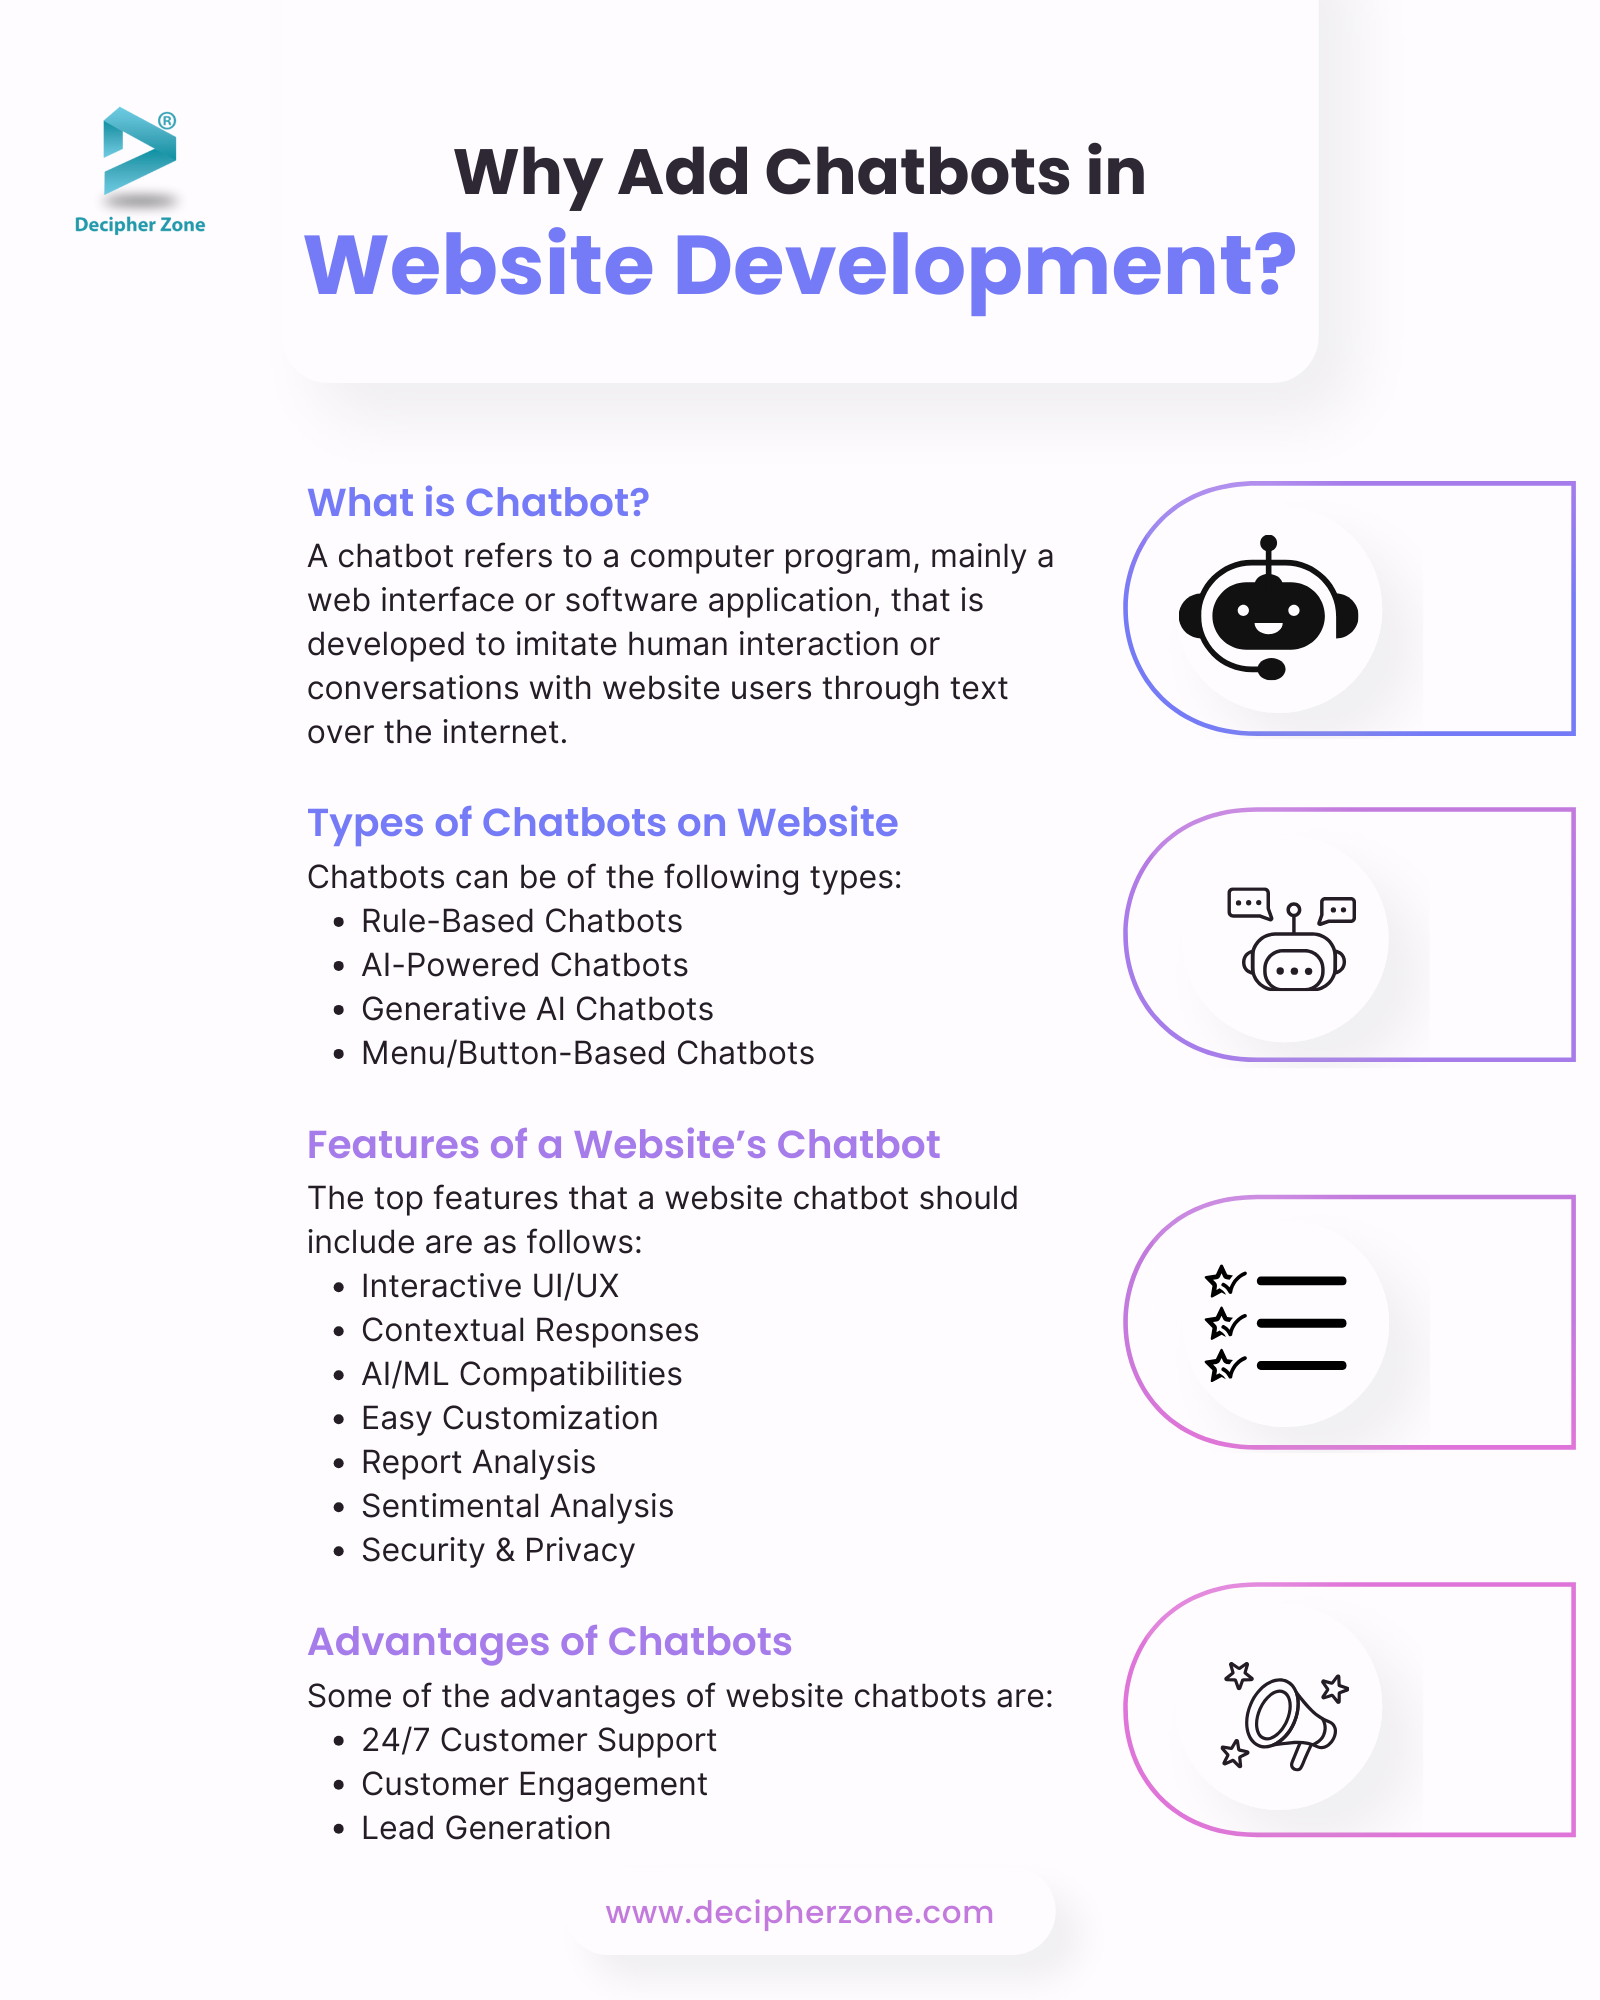 Why Do You Need to Add Chatbots in Your Website Development?